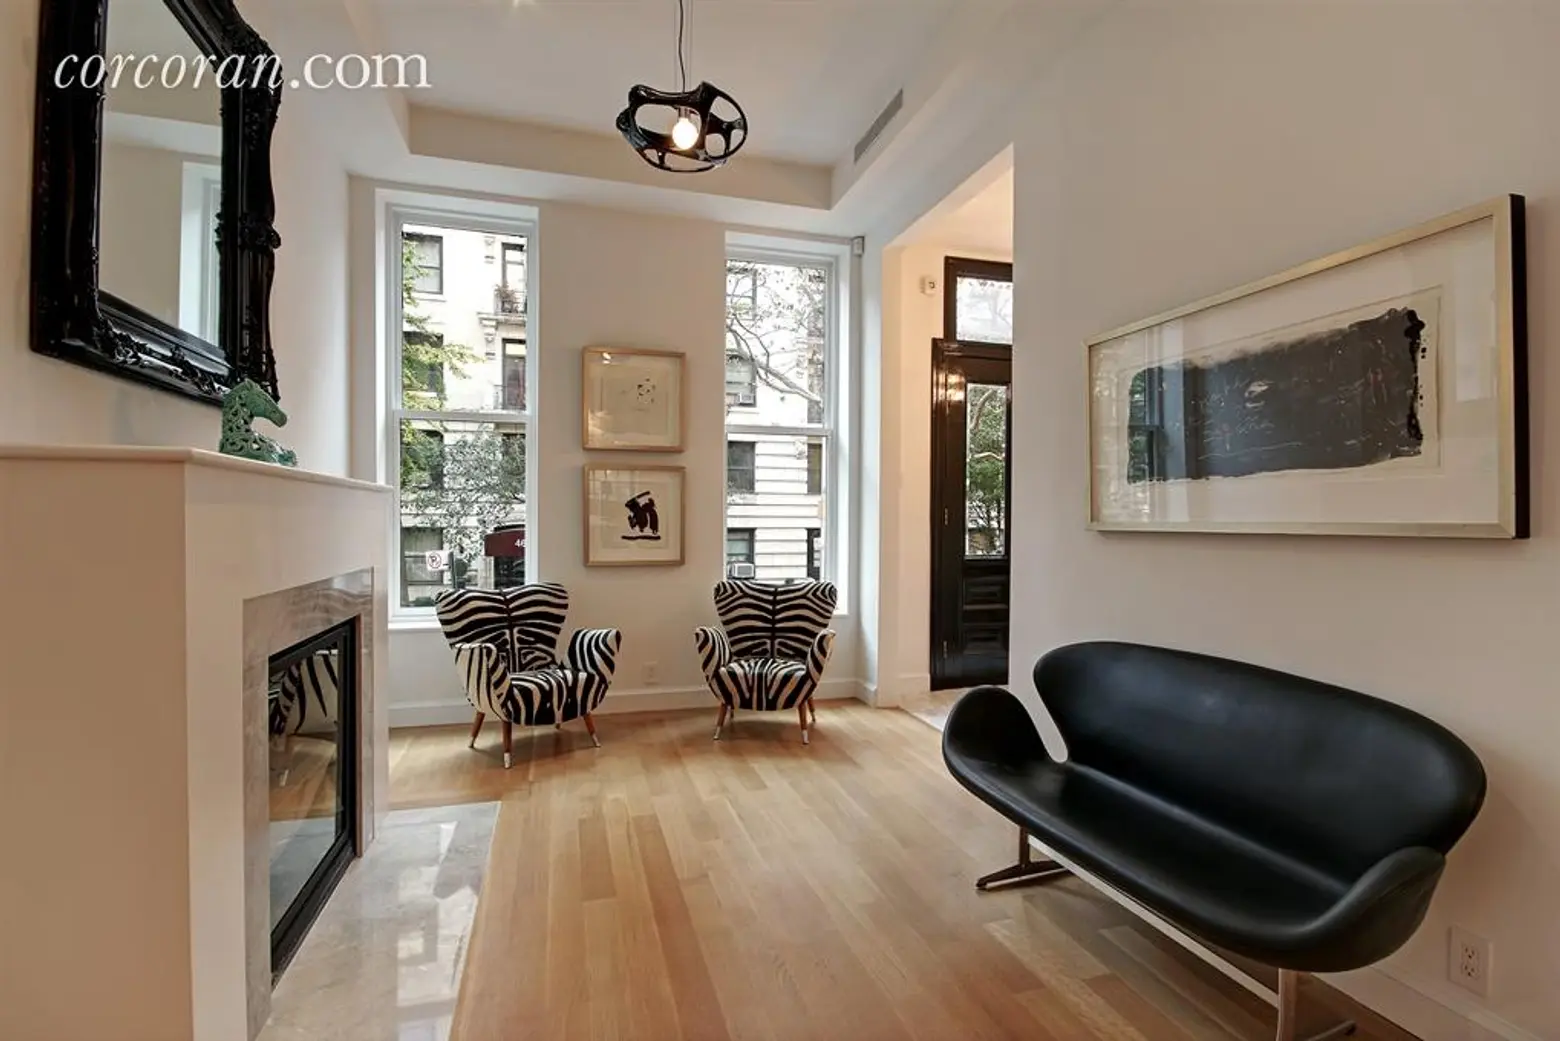 51 West 83rd Street, Townhouse, Upper West Side, Manhattan townhouse for sale, private pool, renovation, cool listings,